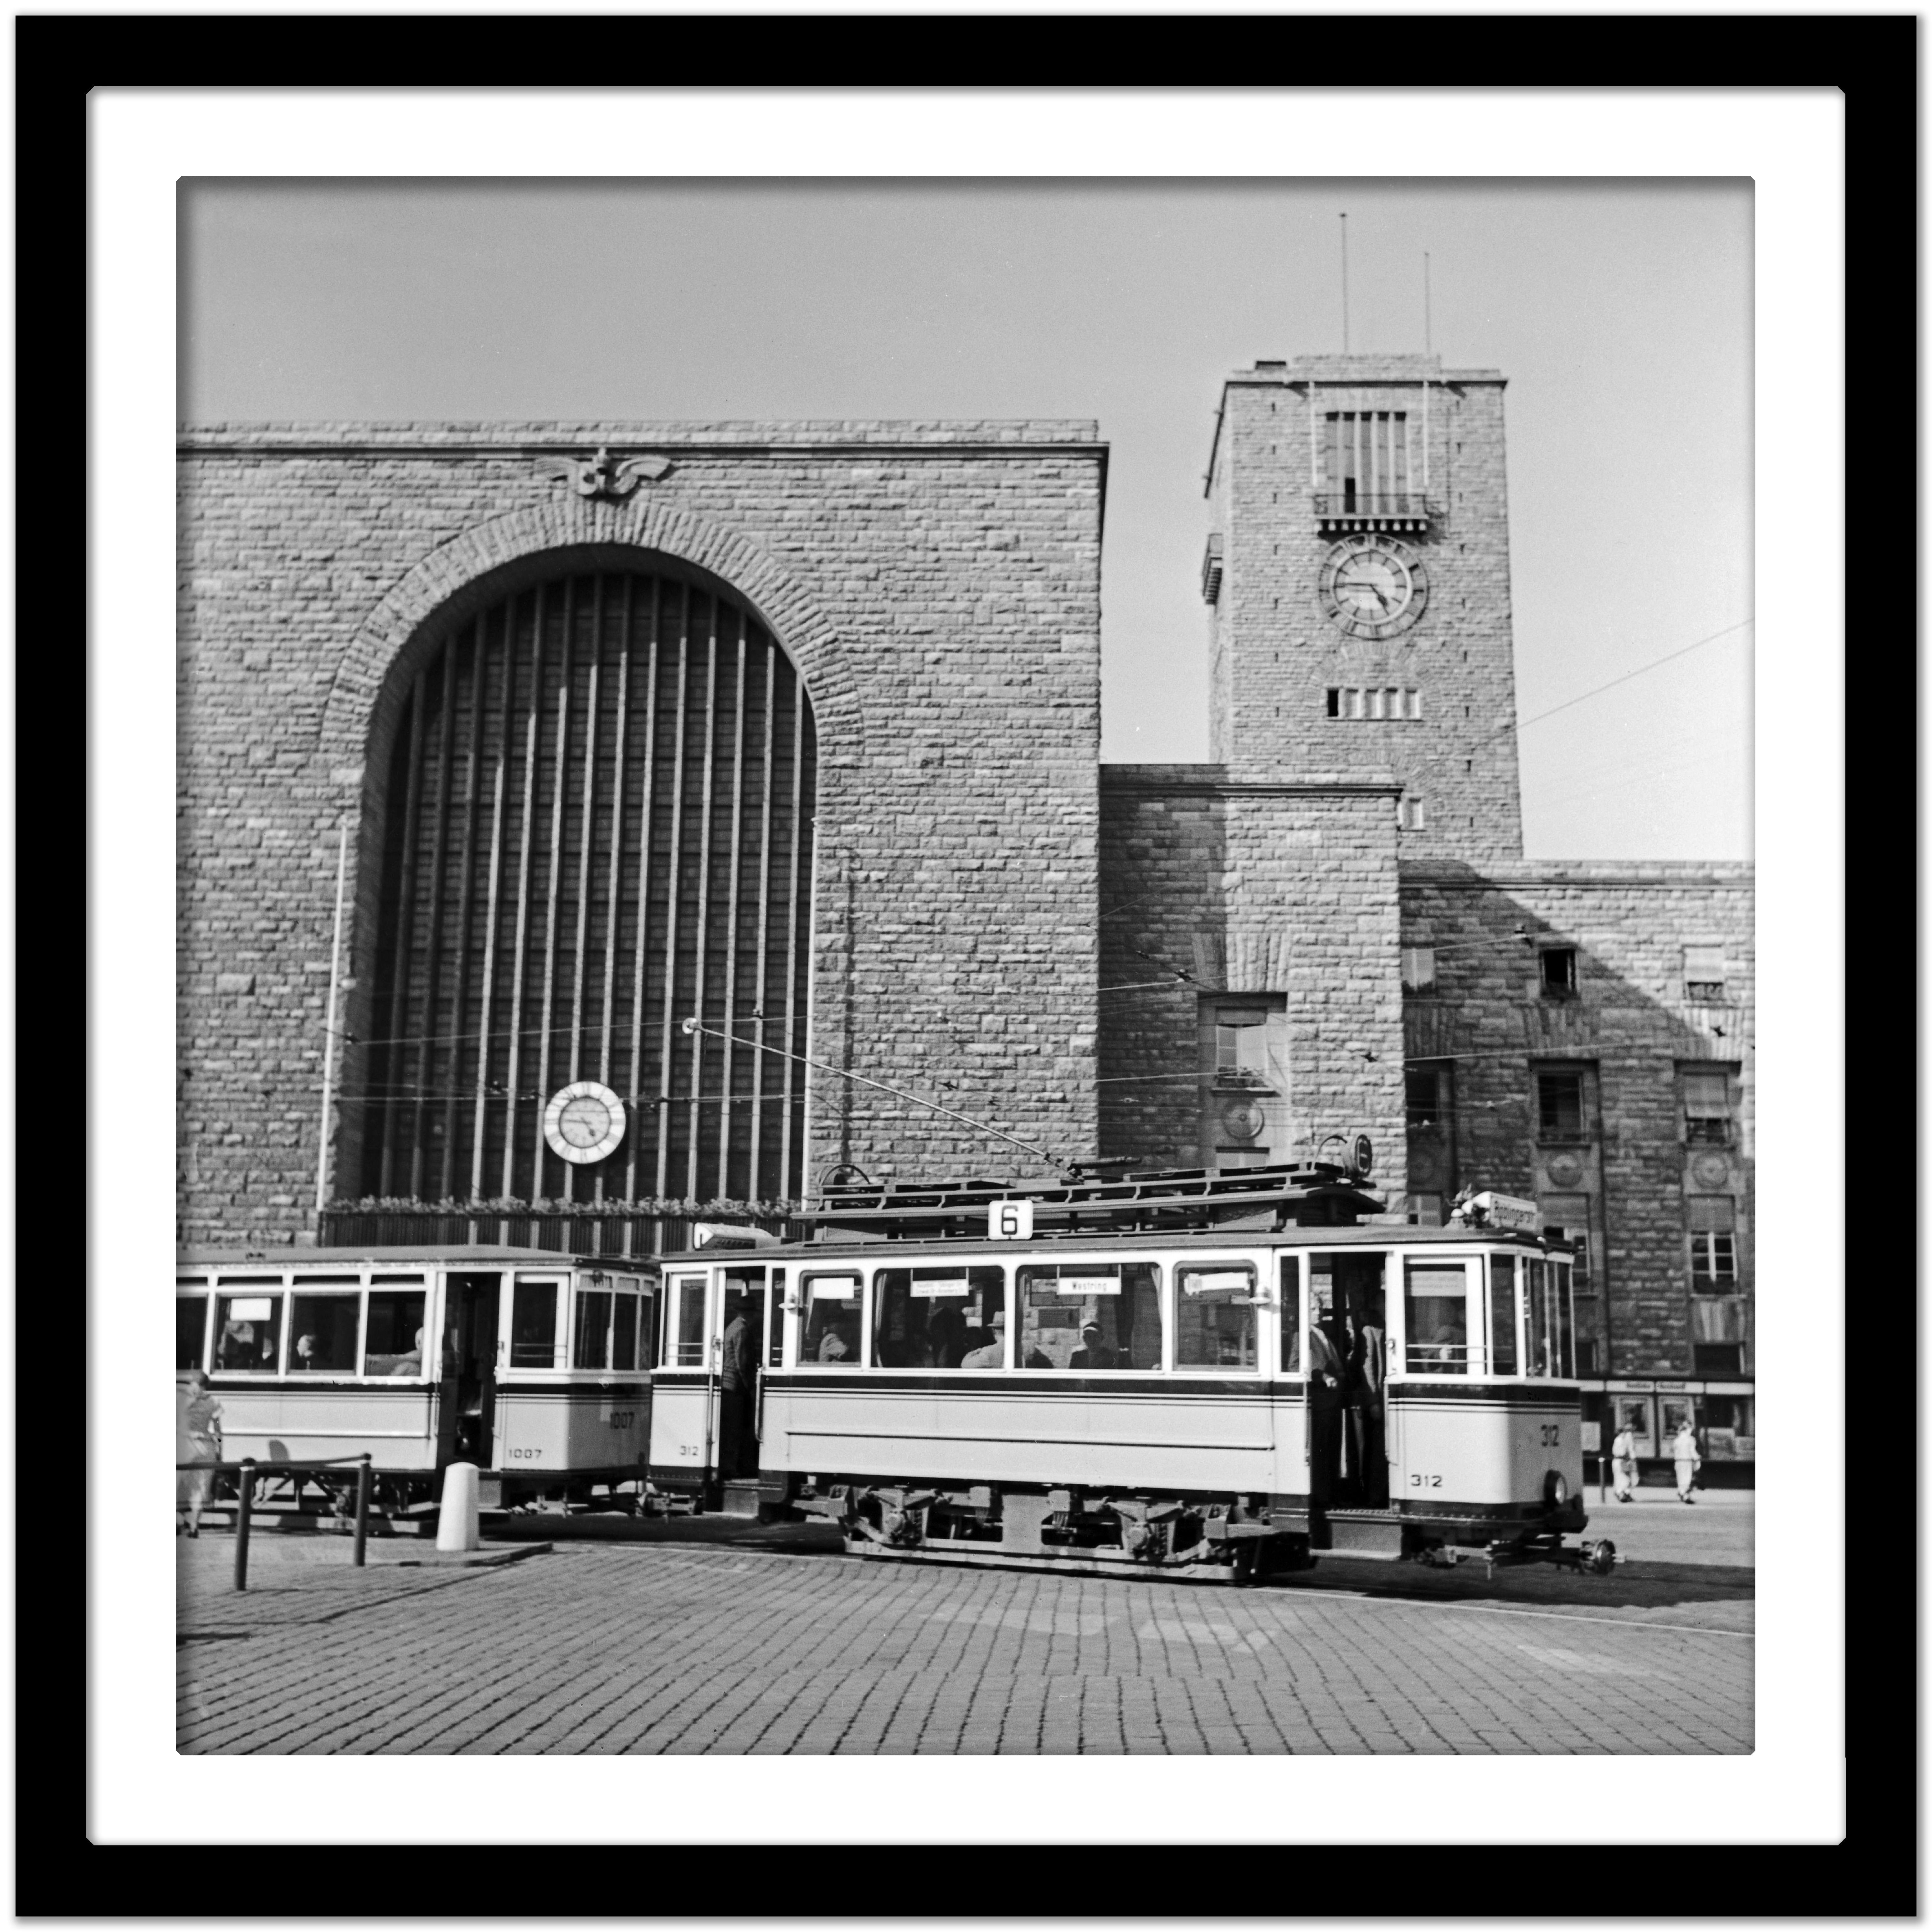 Tram line no. 6 in front of main station, Stuttgart Germany 1935, Printed Later - Gray Black and White Photograph by Karl Heinrich Lämmel